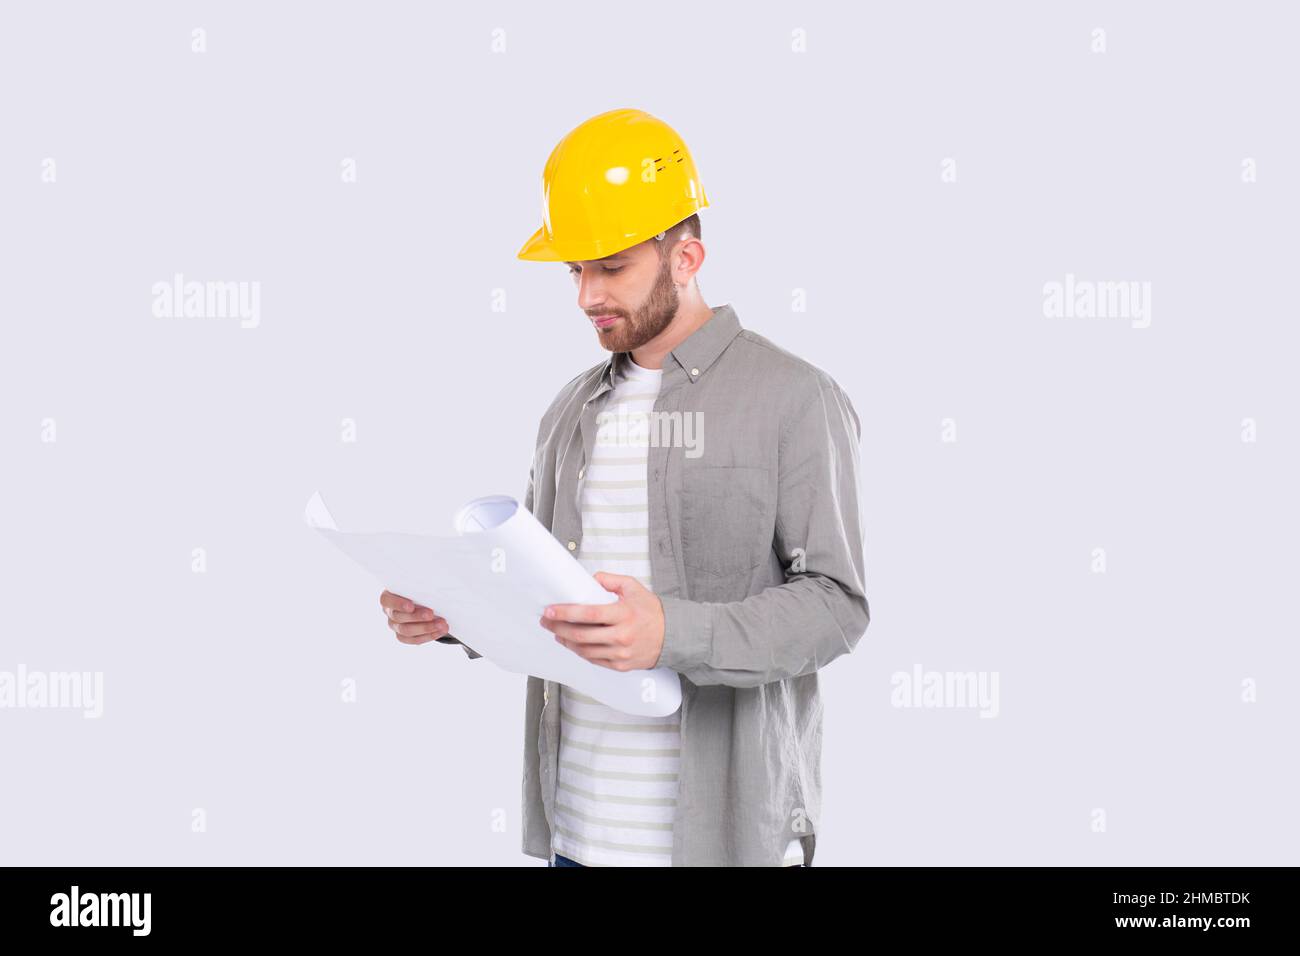 Construction Worker Looking at House Plan. Architect Holding Blueprints. Yellow Hard Helmet. Worker Stock Photo